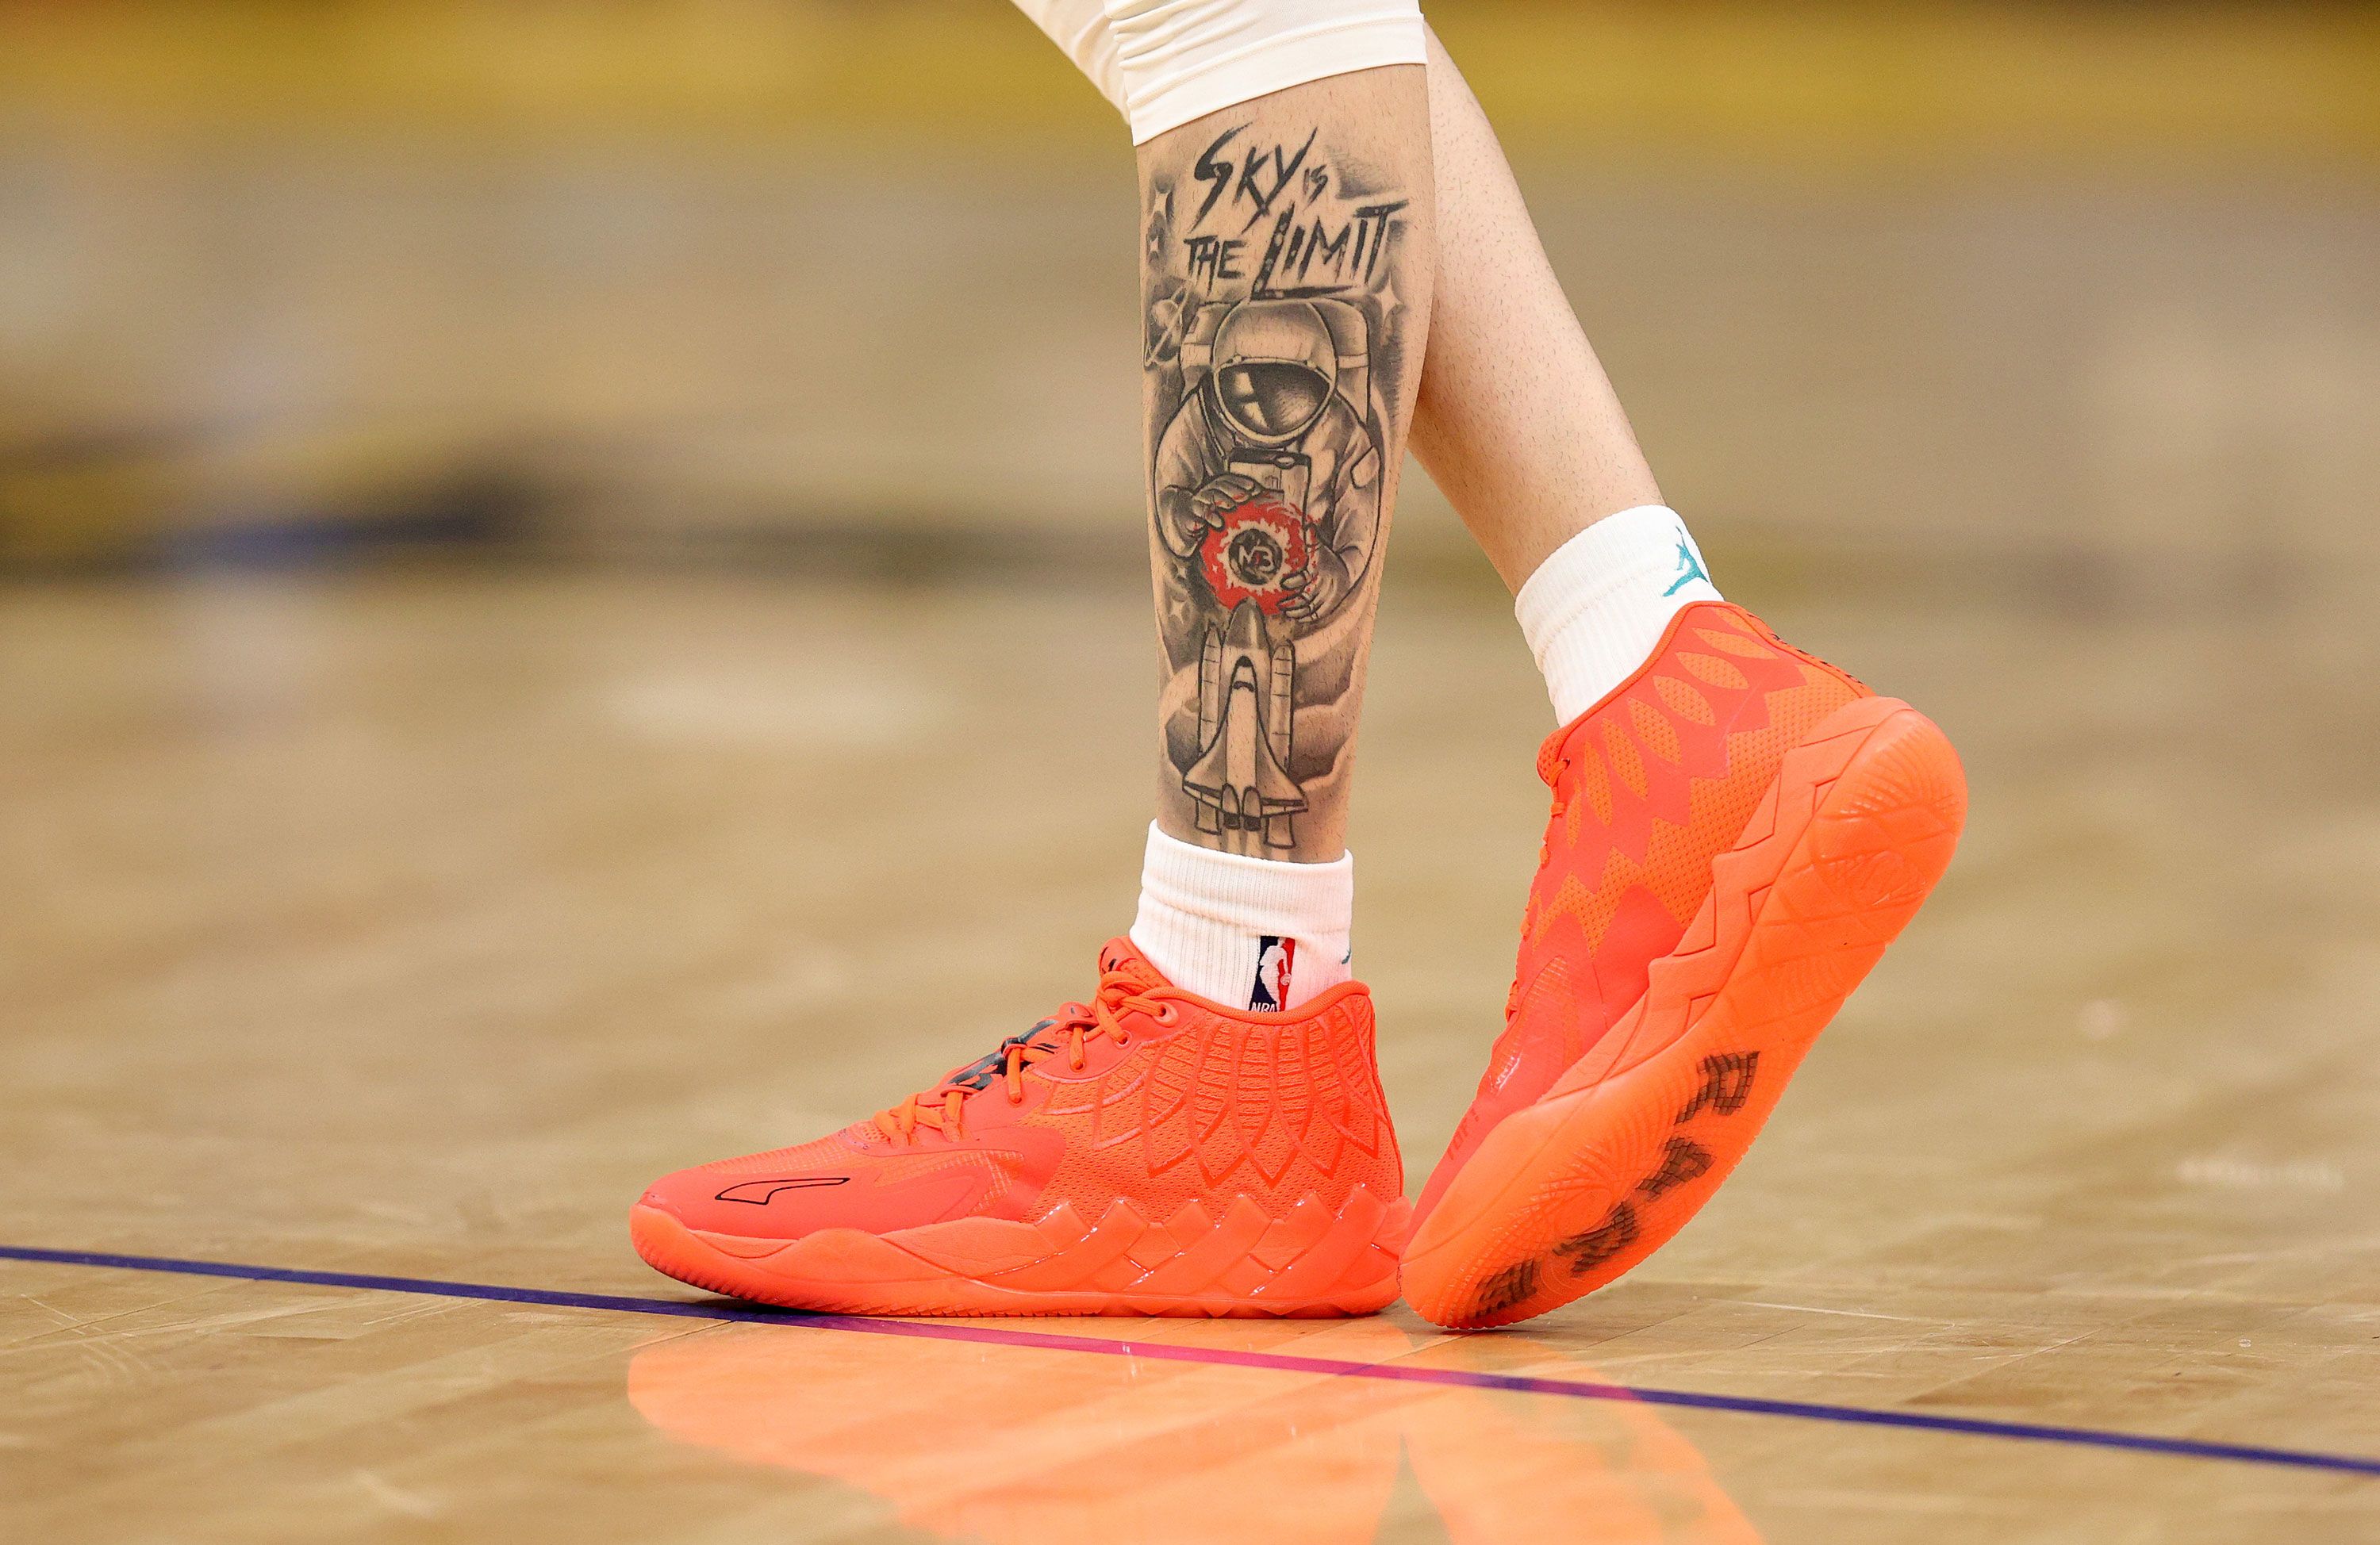 The NBA's tattoo culture has created a new type of influencer